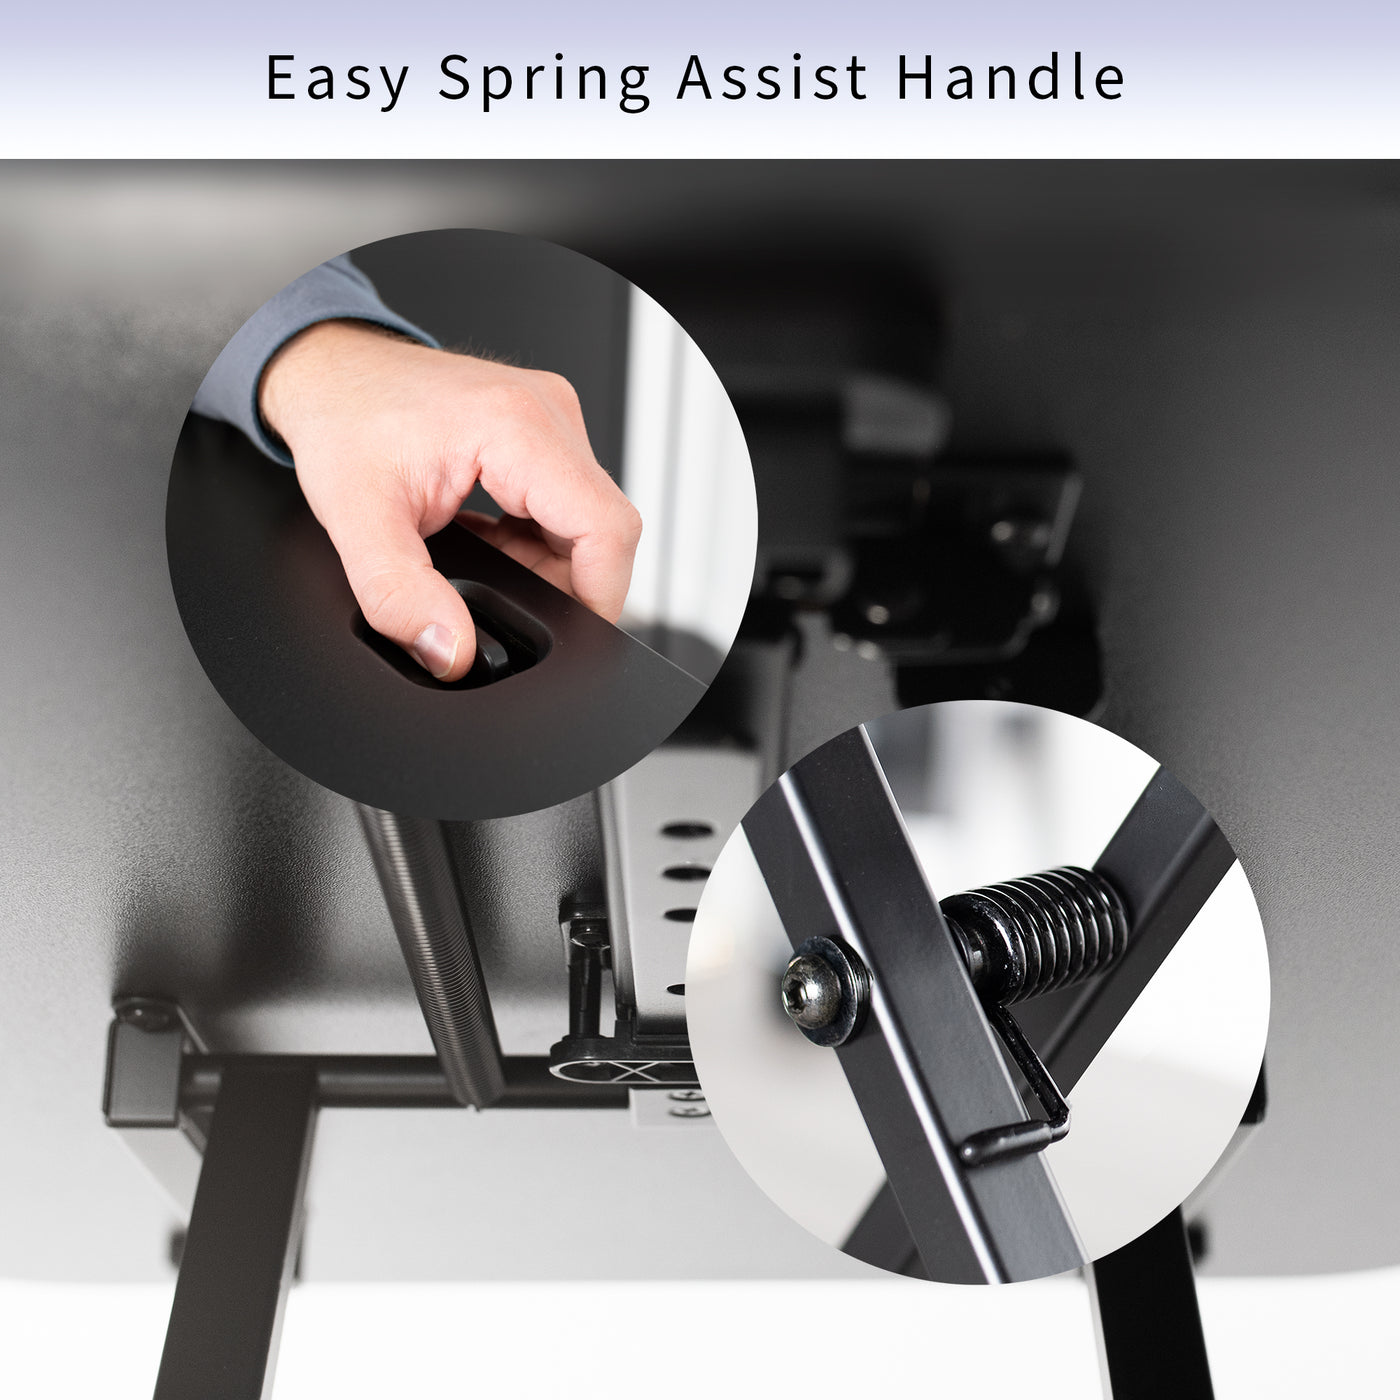 Smooth transitions provided with an easy access spring-assist handle.